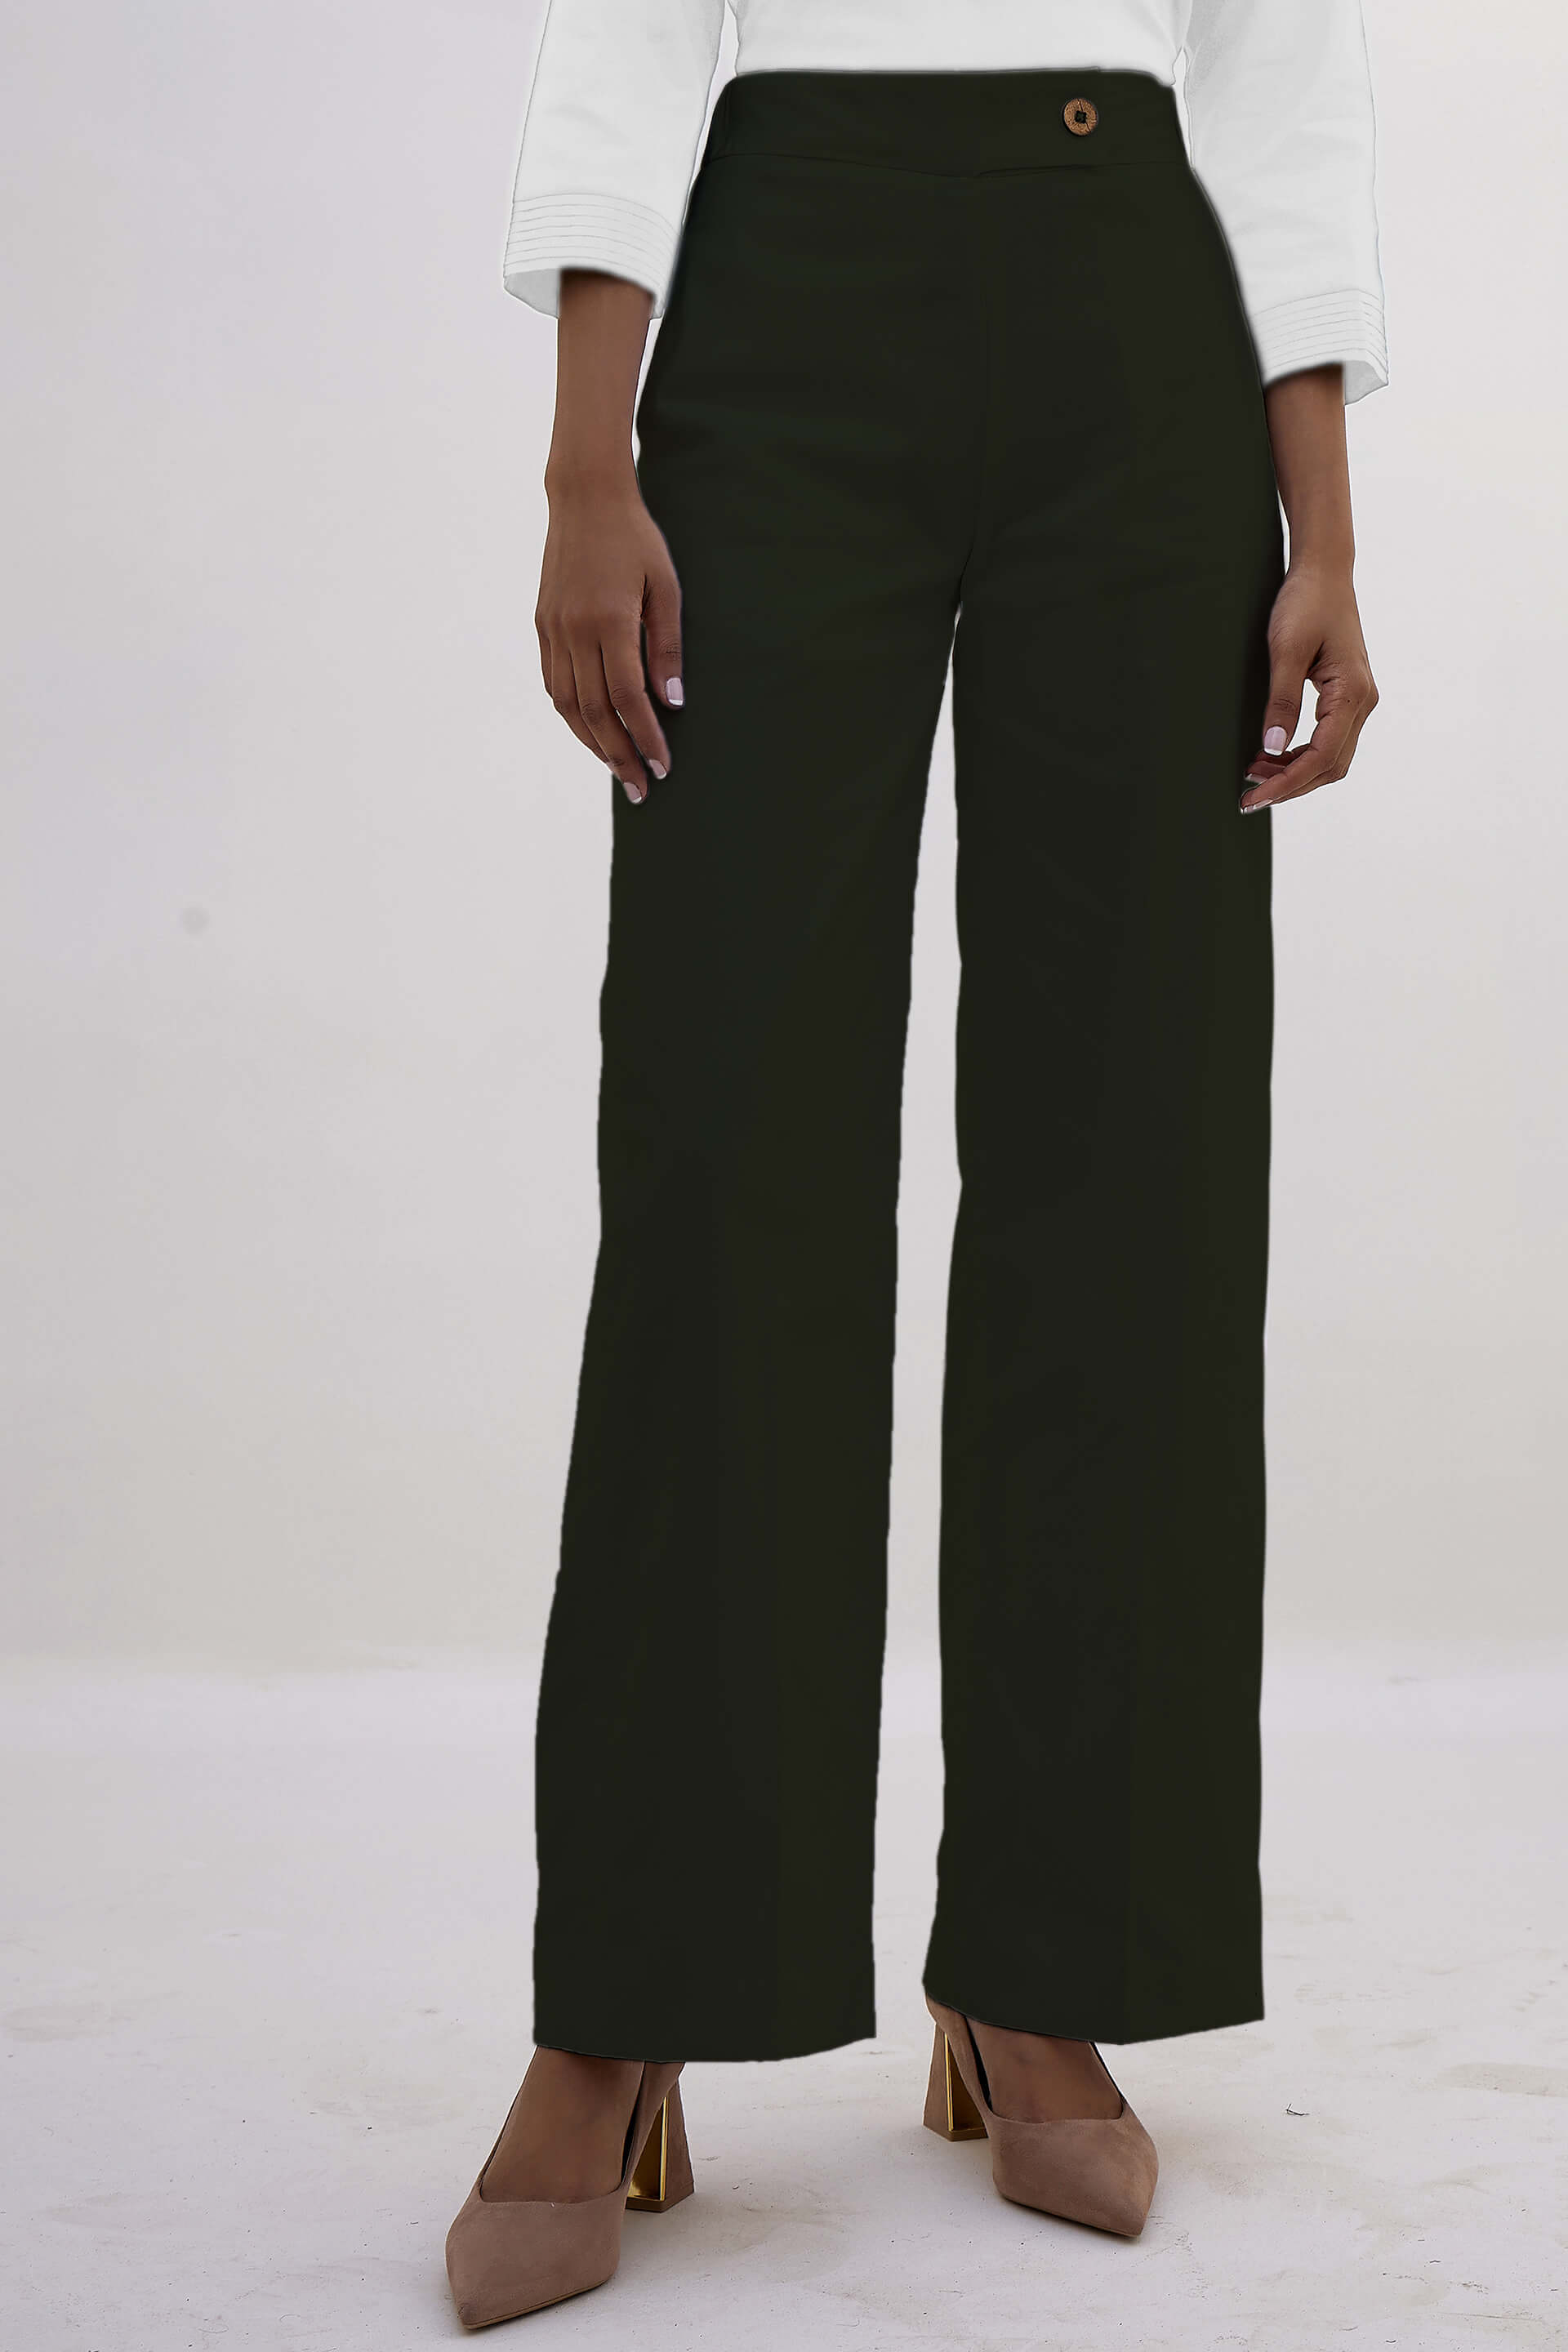 Mentos Elasticated Wide Leg Trousers - Olive Green